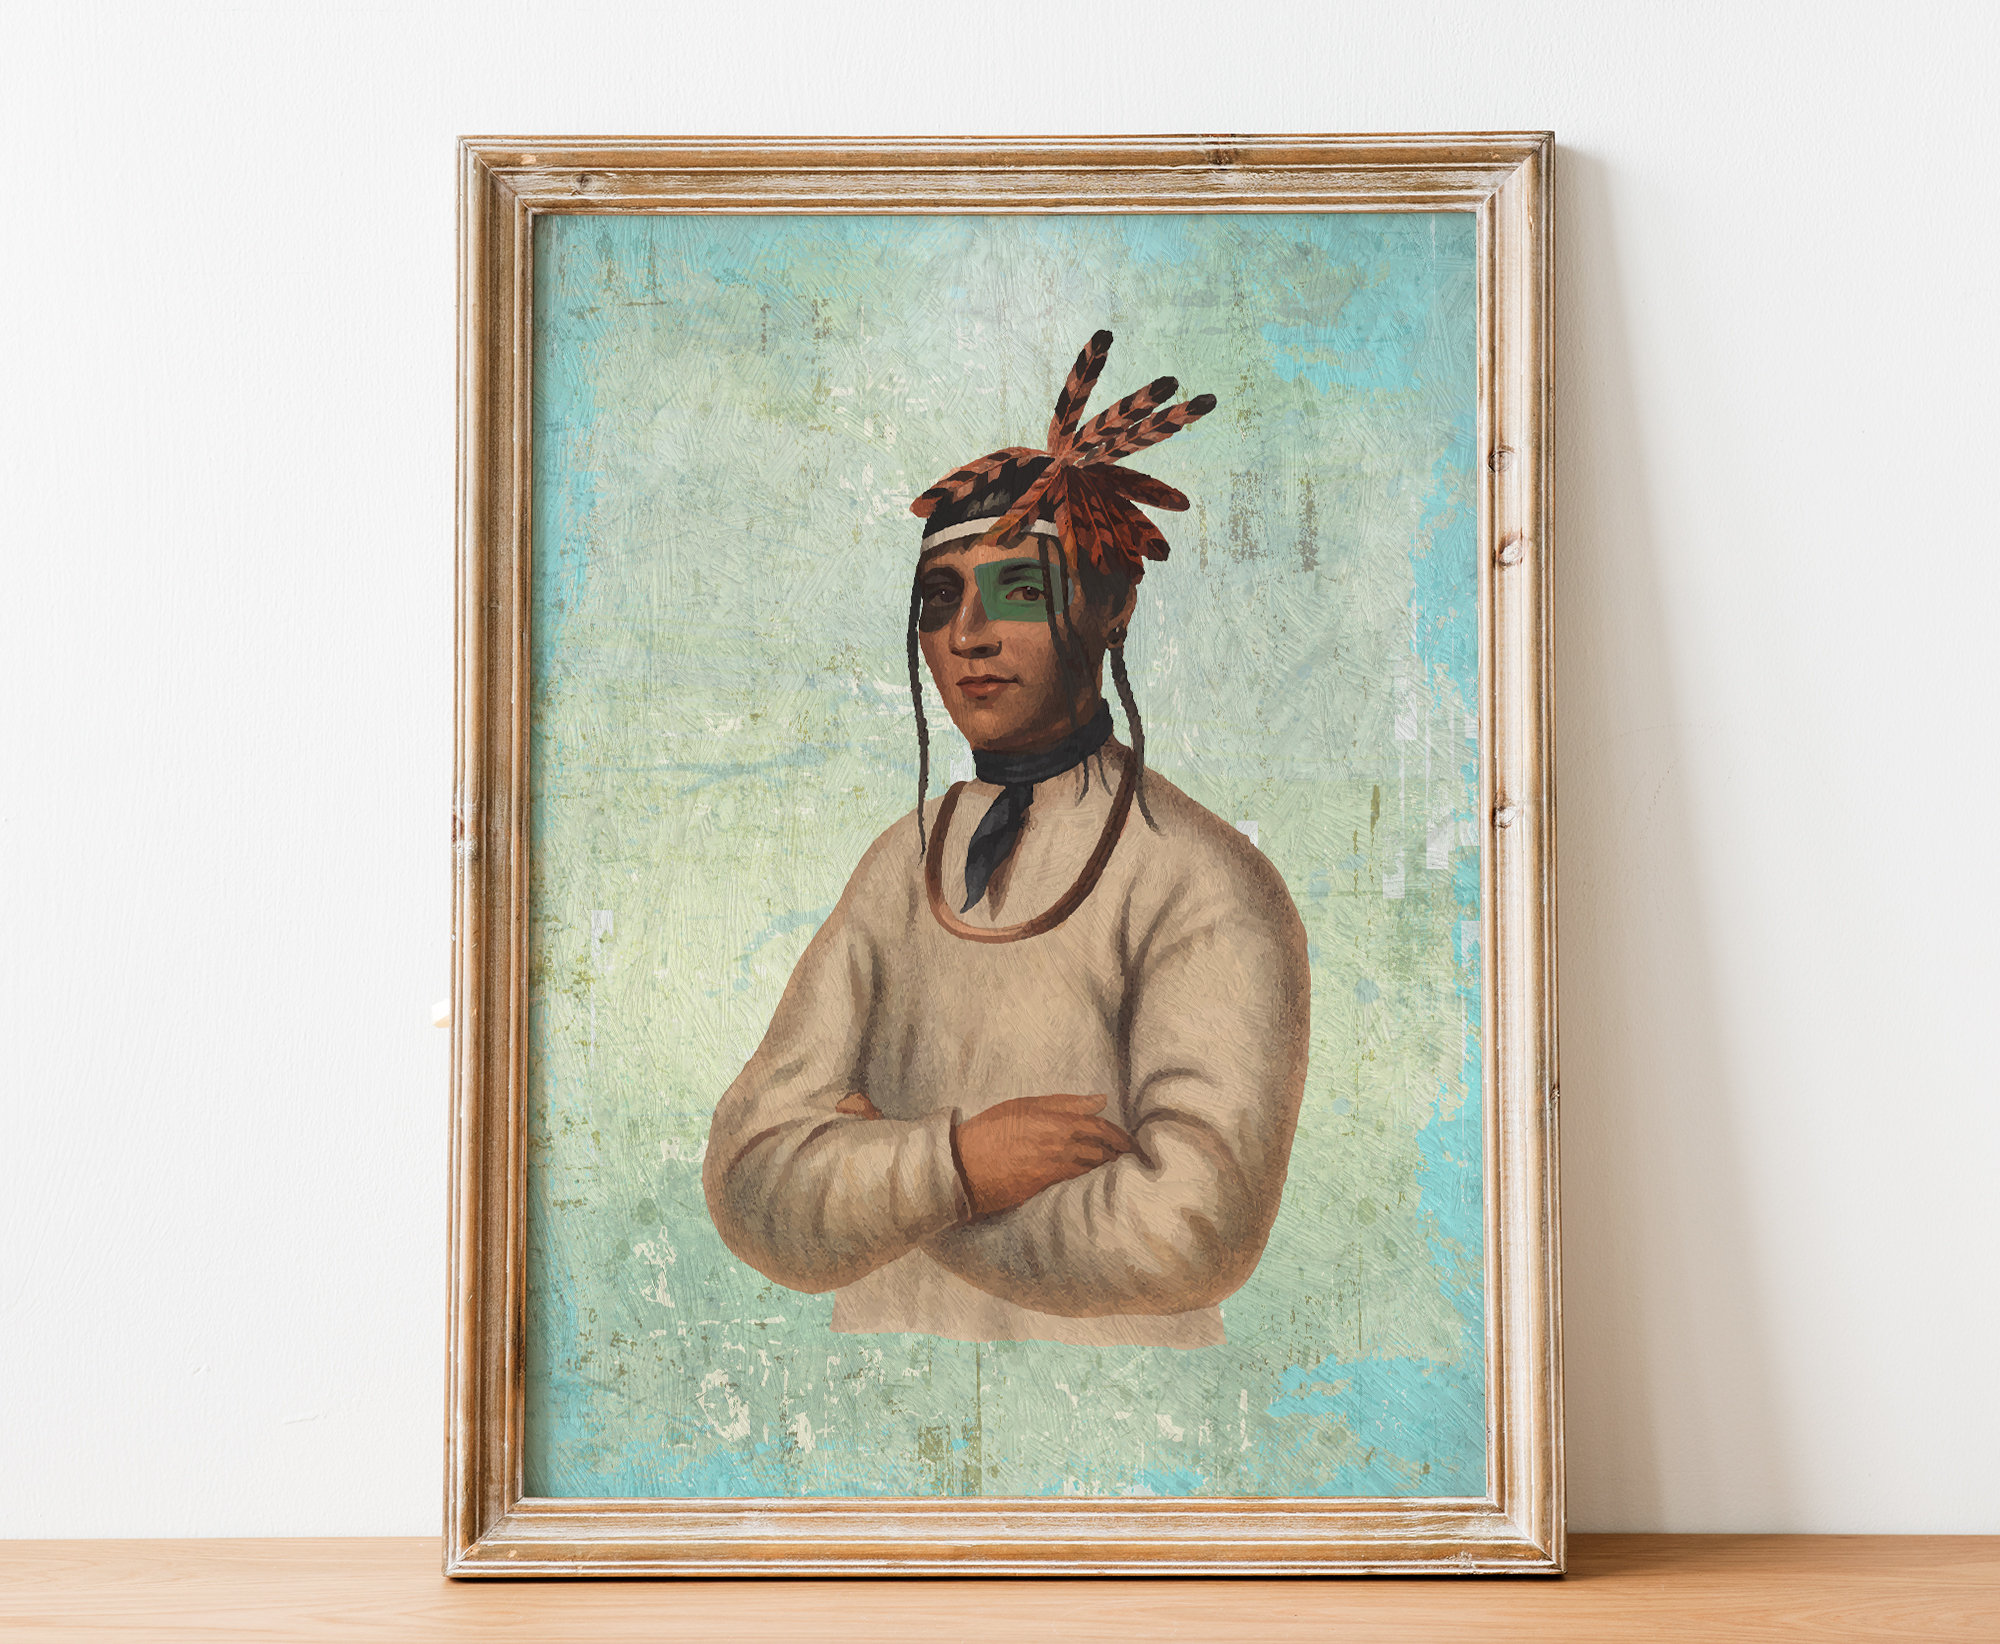 Vintage Ojibway Native American Man Art Print Vintage Giclee on Cotton Canvas or Paper Canvas Poster Wall Decor